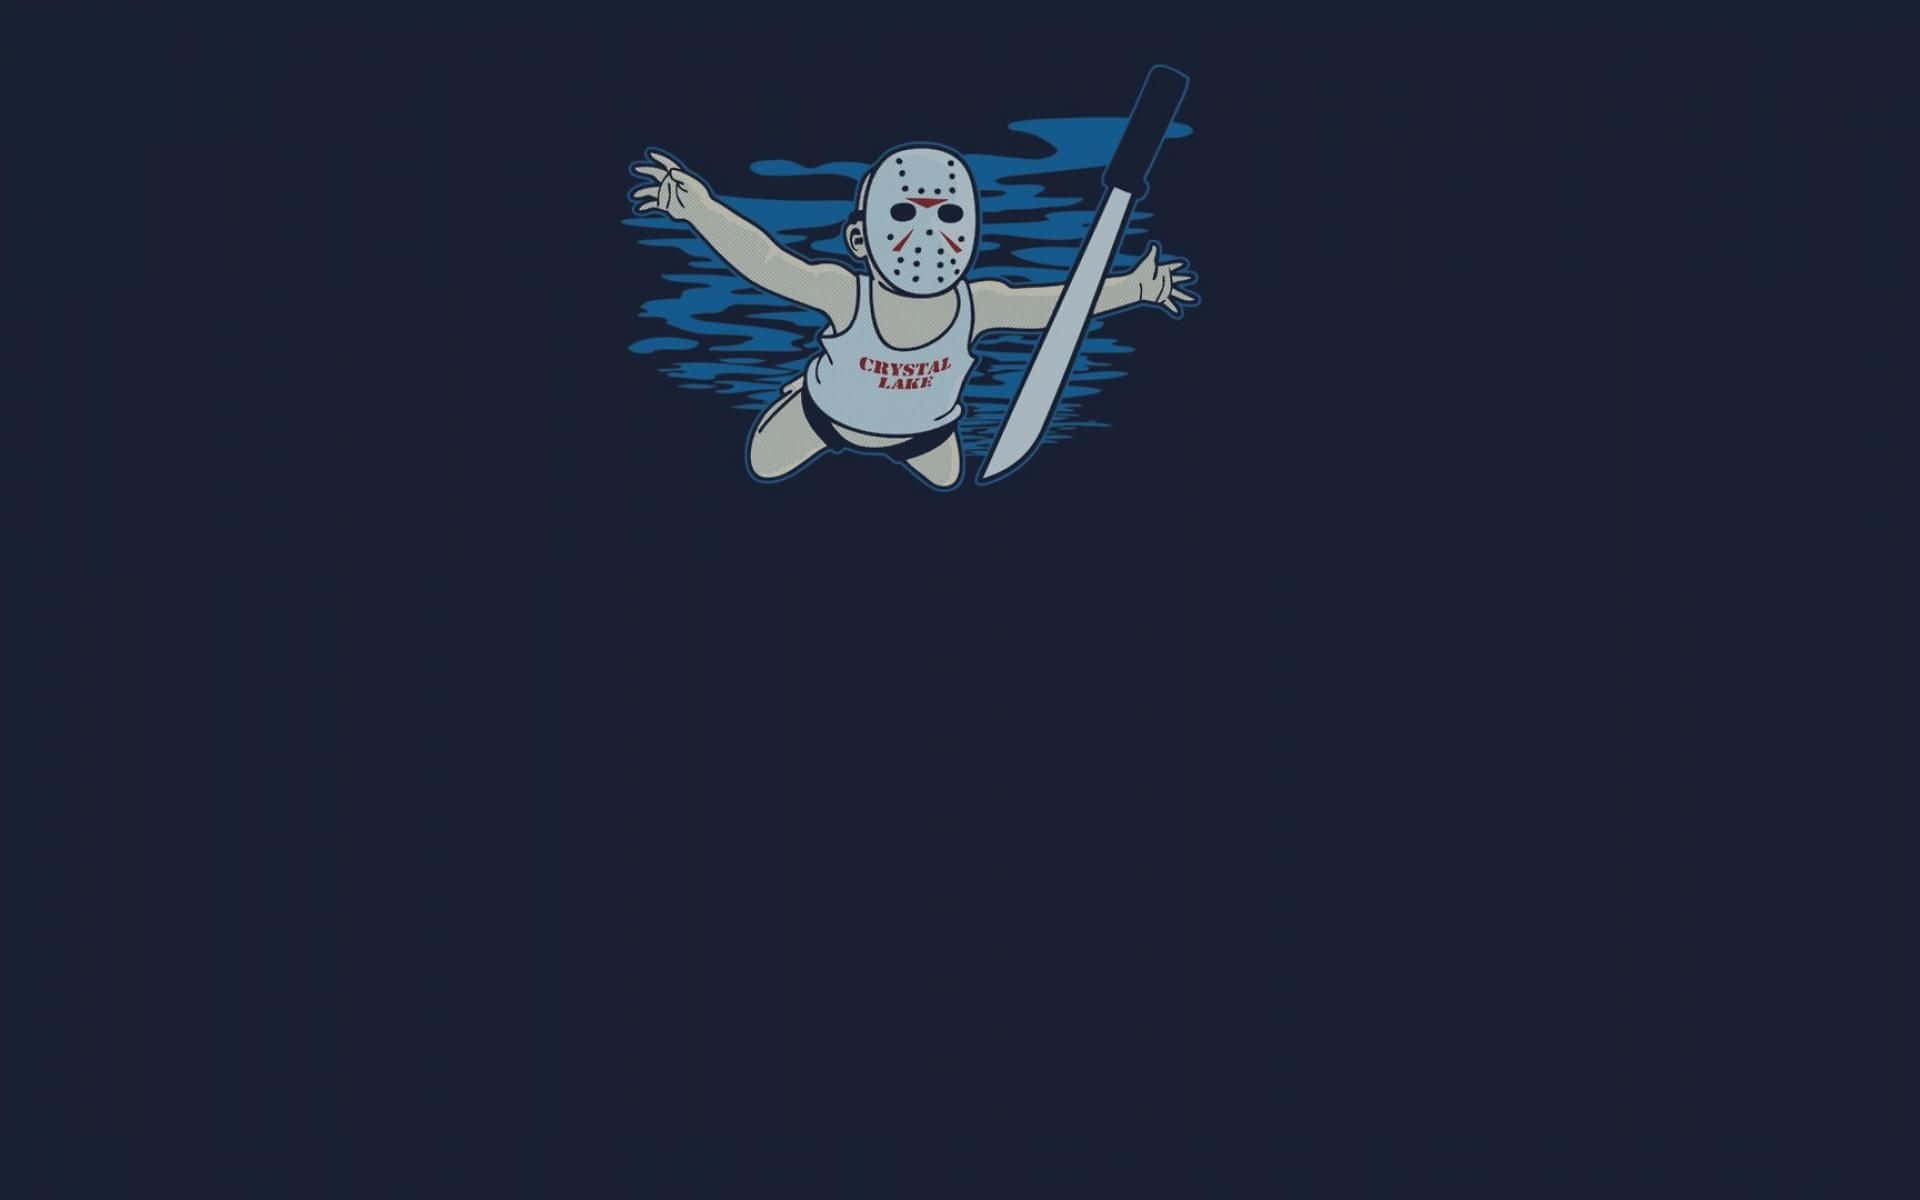 Spooky Friday the 13th Wallpaper with Full Moon and Silhouette Scene